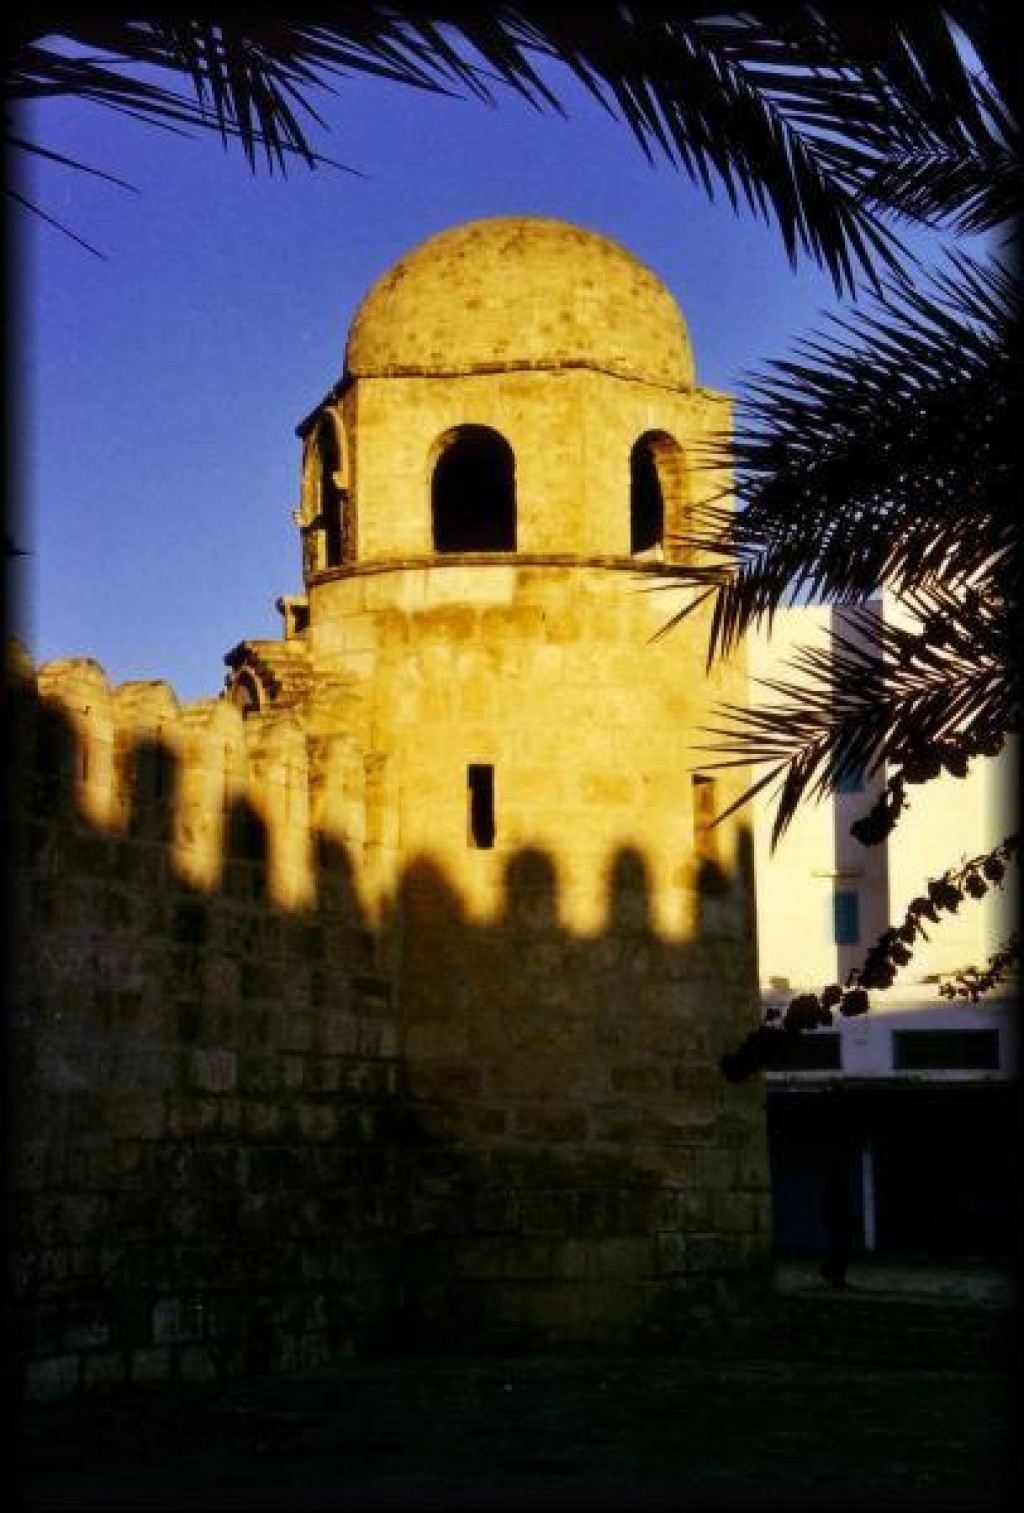 Sousse was founded in the 9th century.  This is a picture of the Ribat.